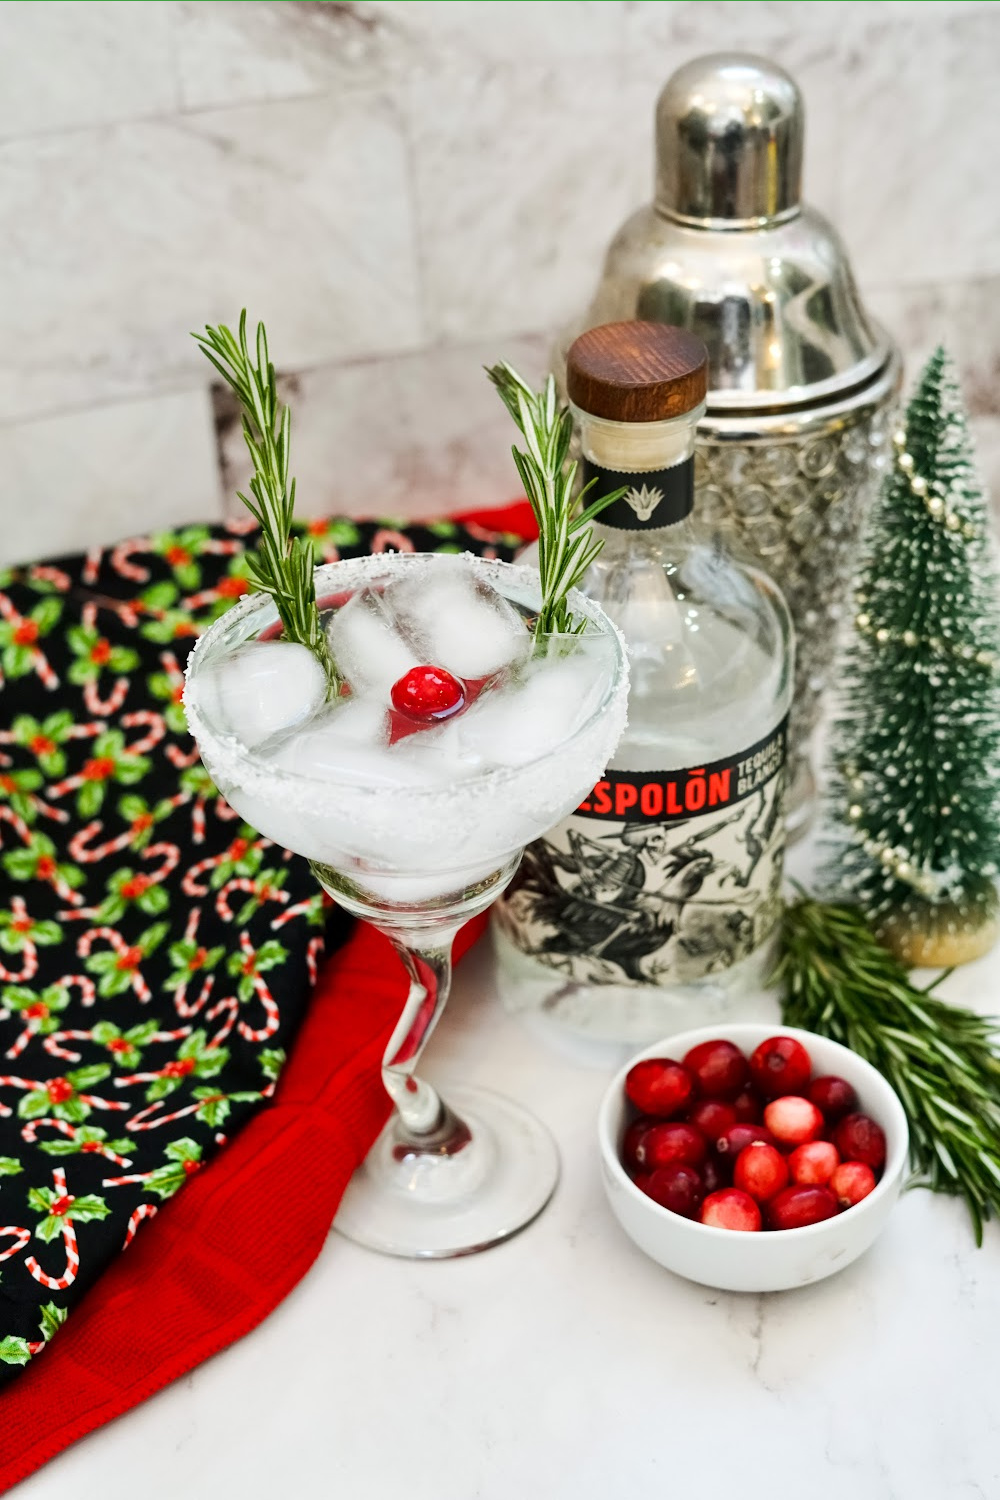 A margarita decorated to look like Rudolph for Christmas parties.